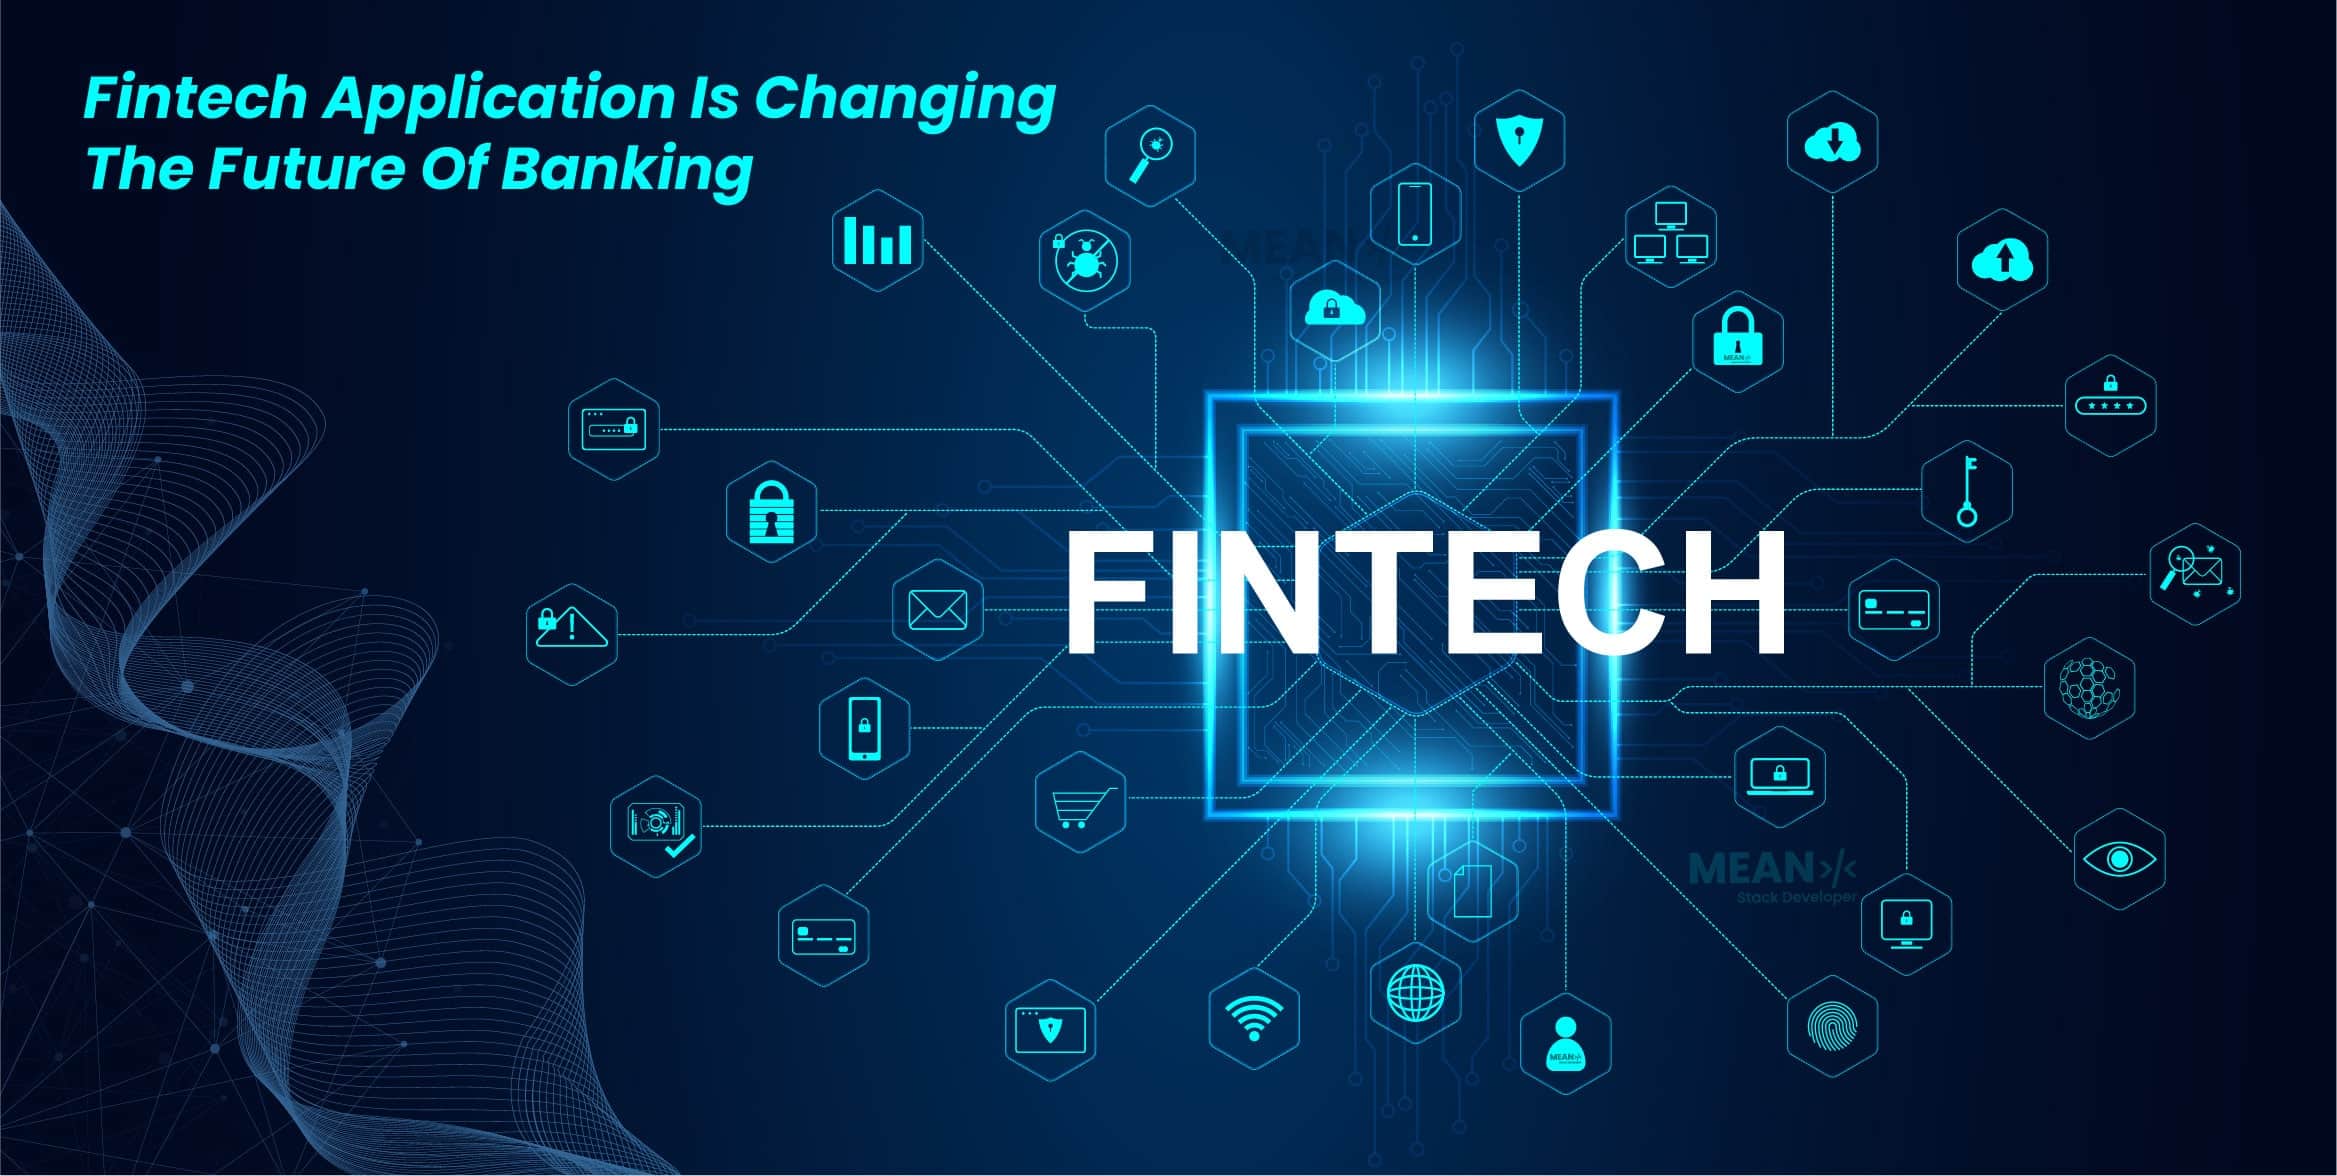 Fintech Application Is Changing The Future Of Banking